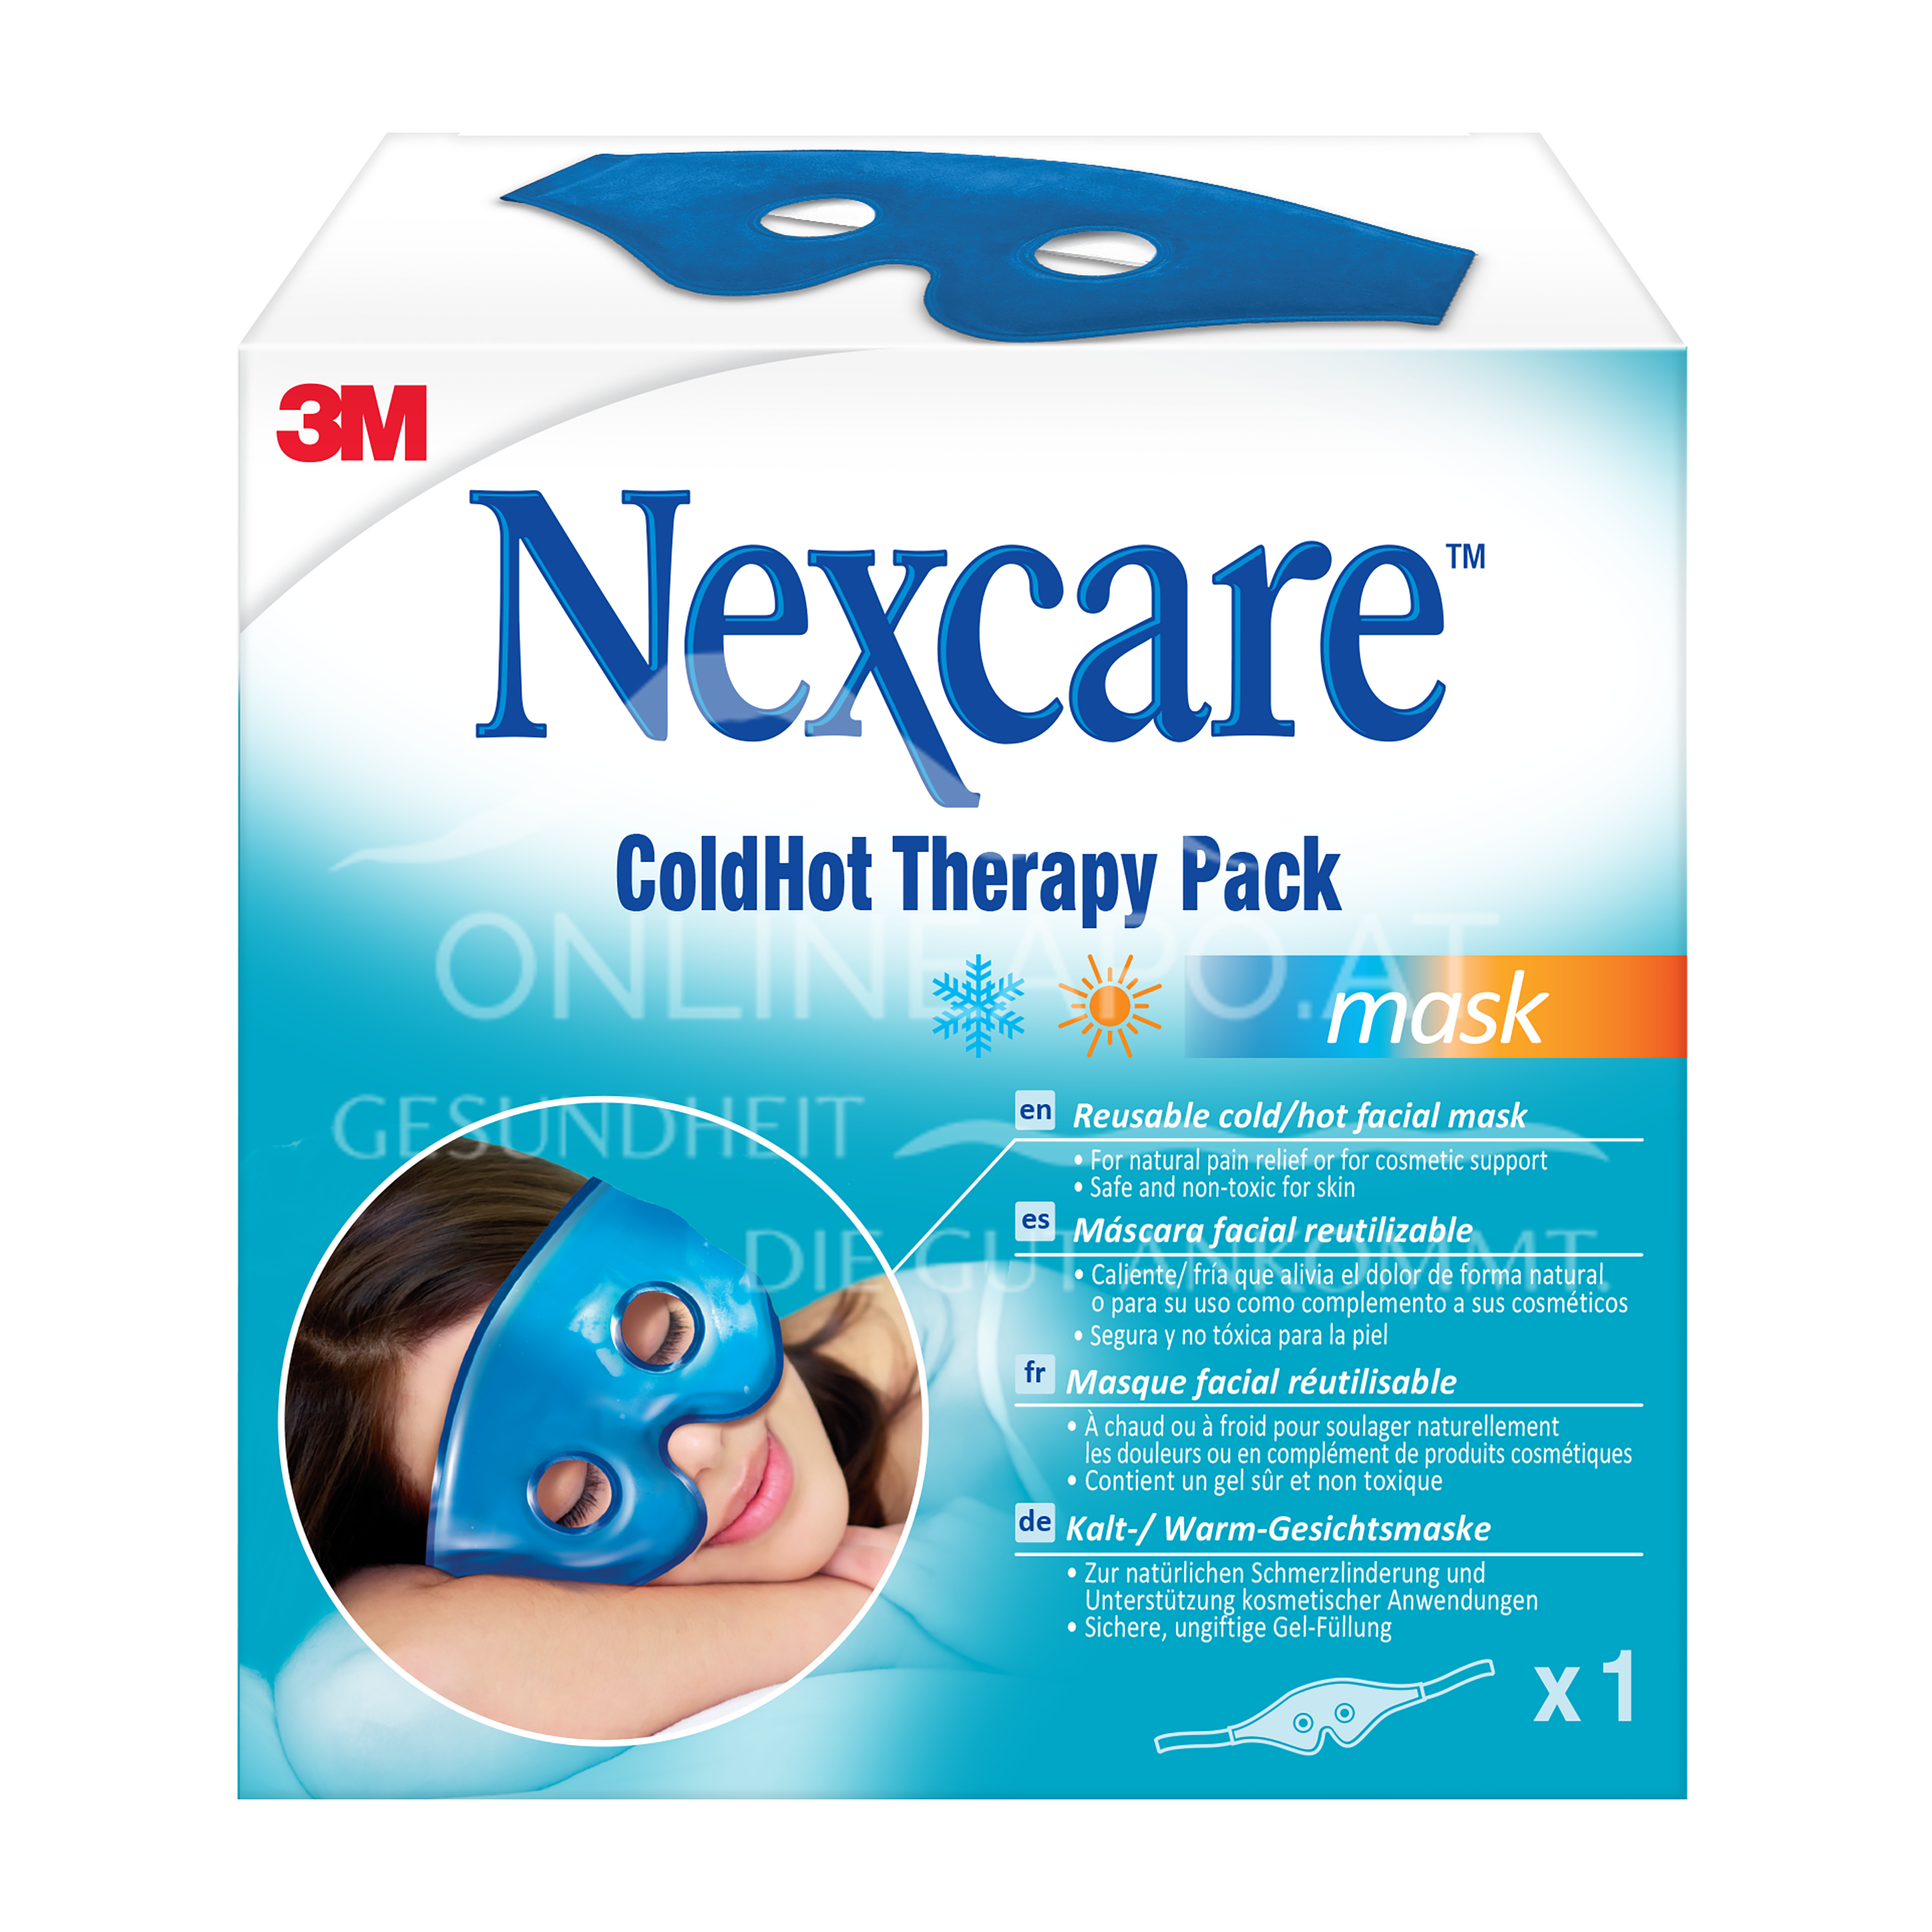 3M Nexcare™ ColdHot Therapy Pack Augenmaske